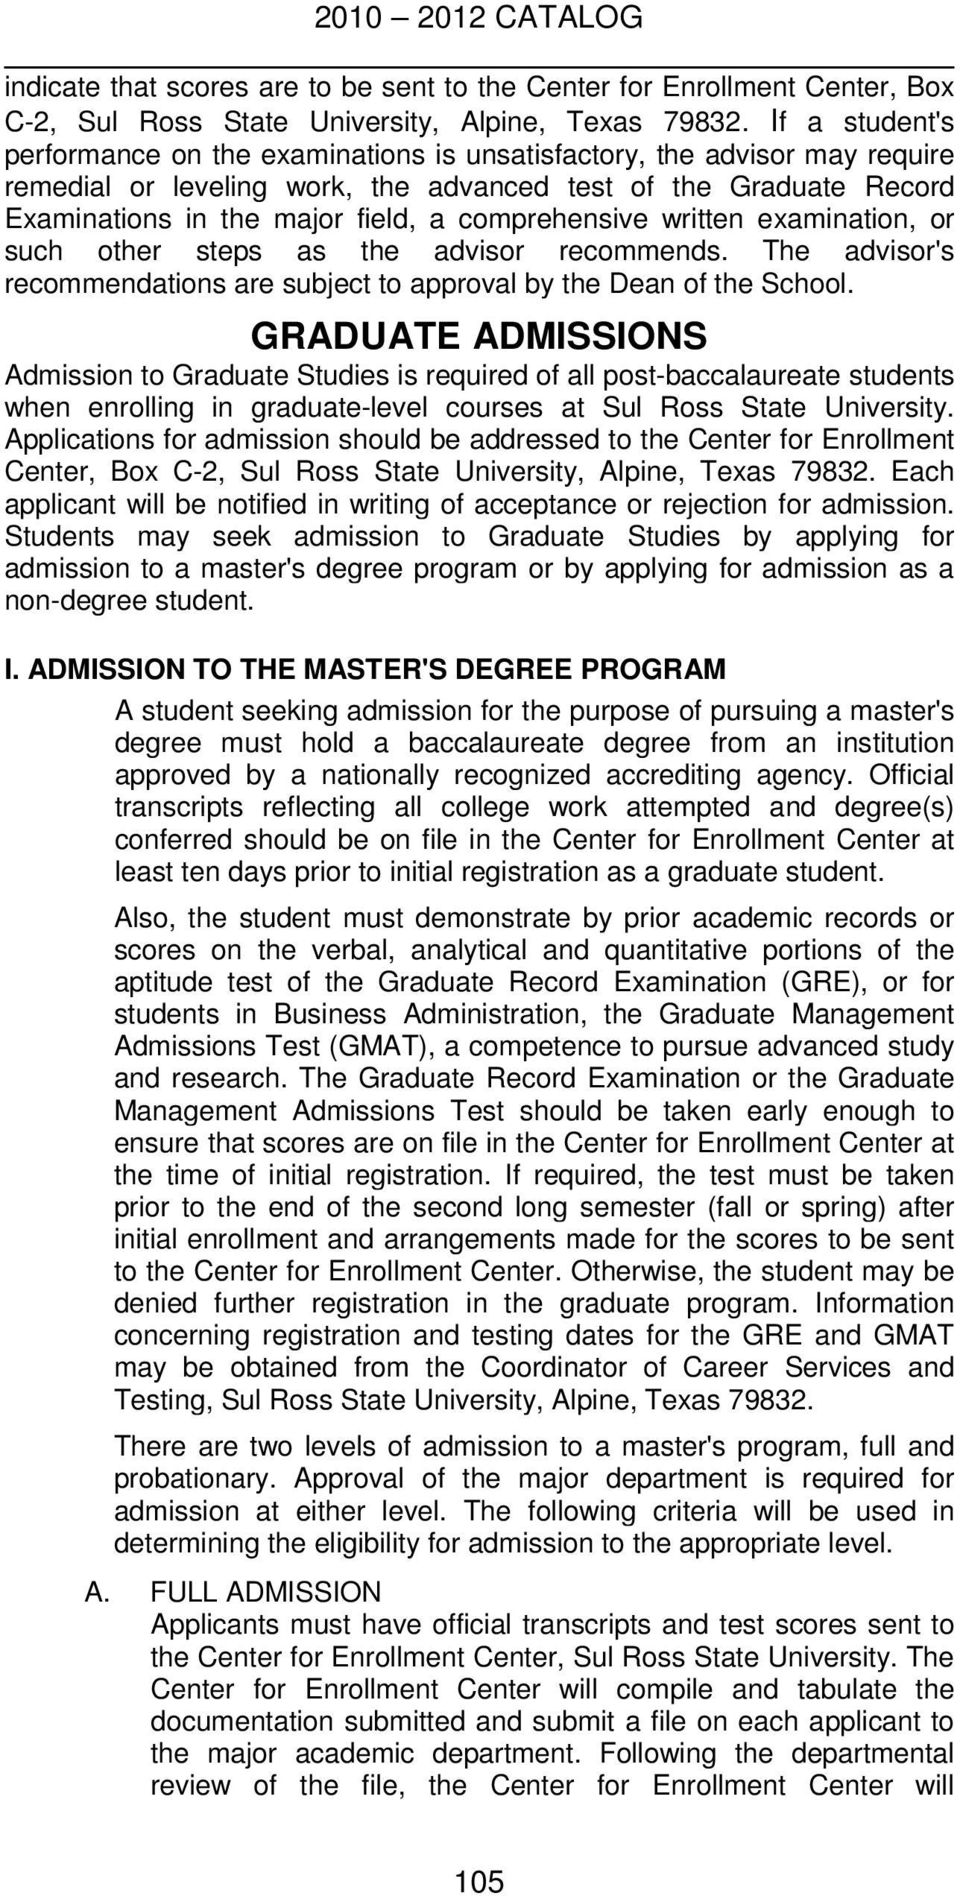 comprehensive written examination, or such other steps as the advisor recommends. The advisor's recommendations are subject to approval by the Dean of the School.